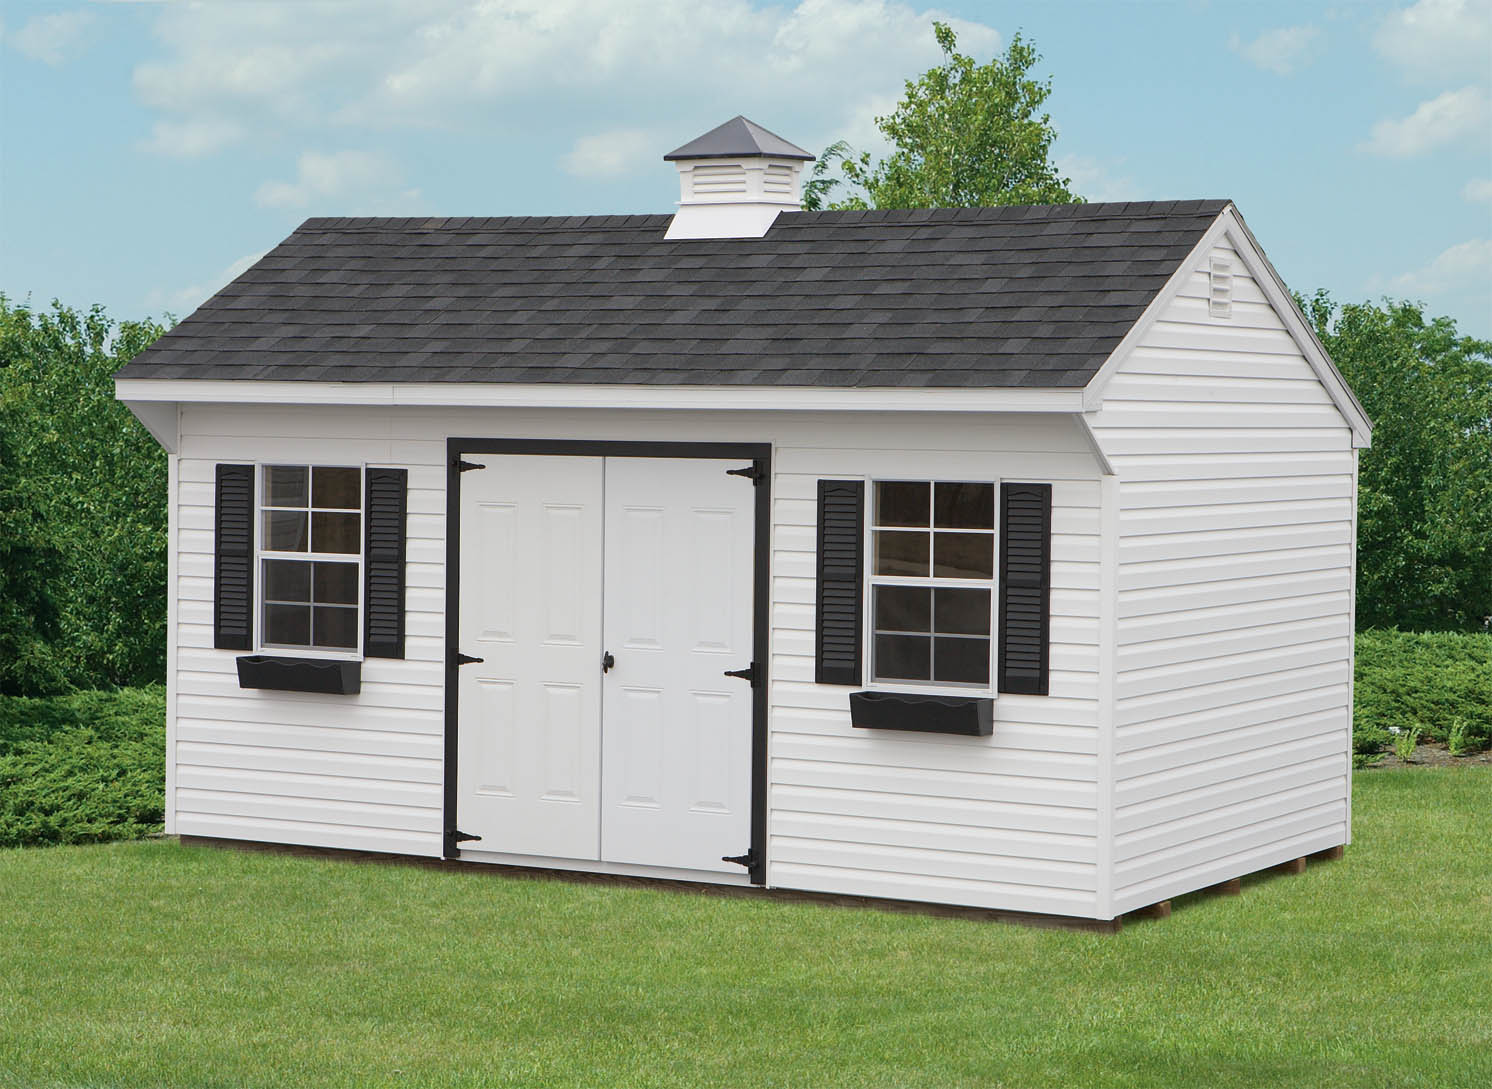 201212 shed plans